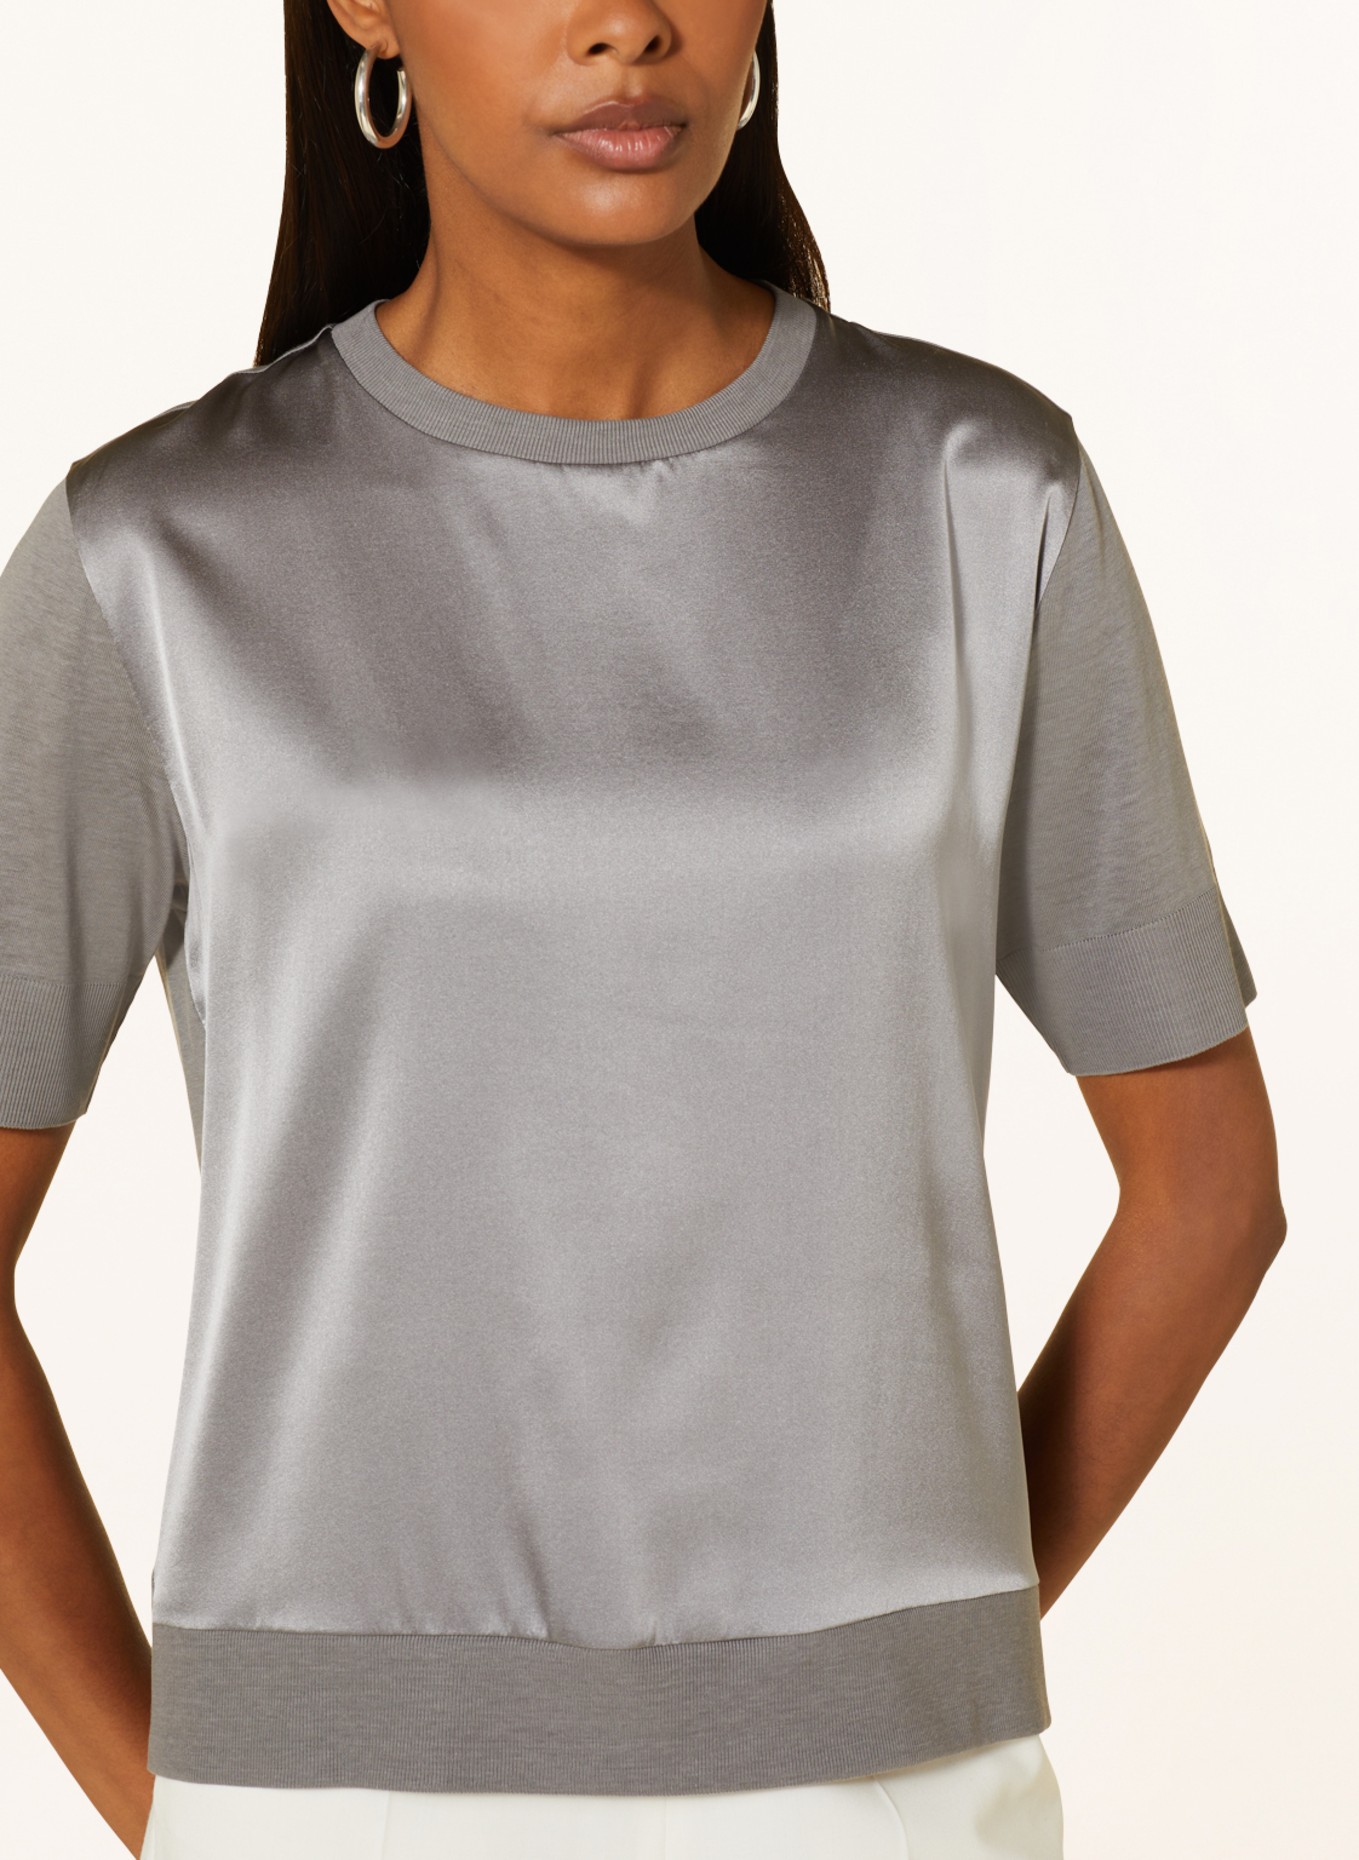 windsor. Shirt blouse in mixed materials, Color: GRAY (Image 4)